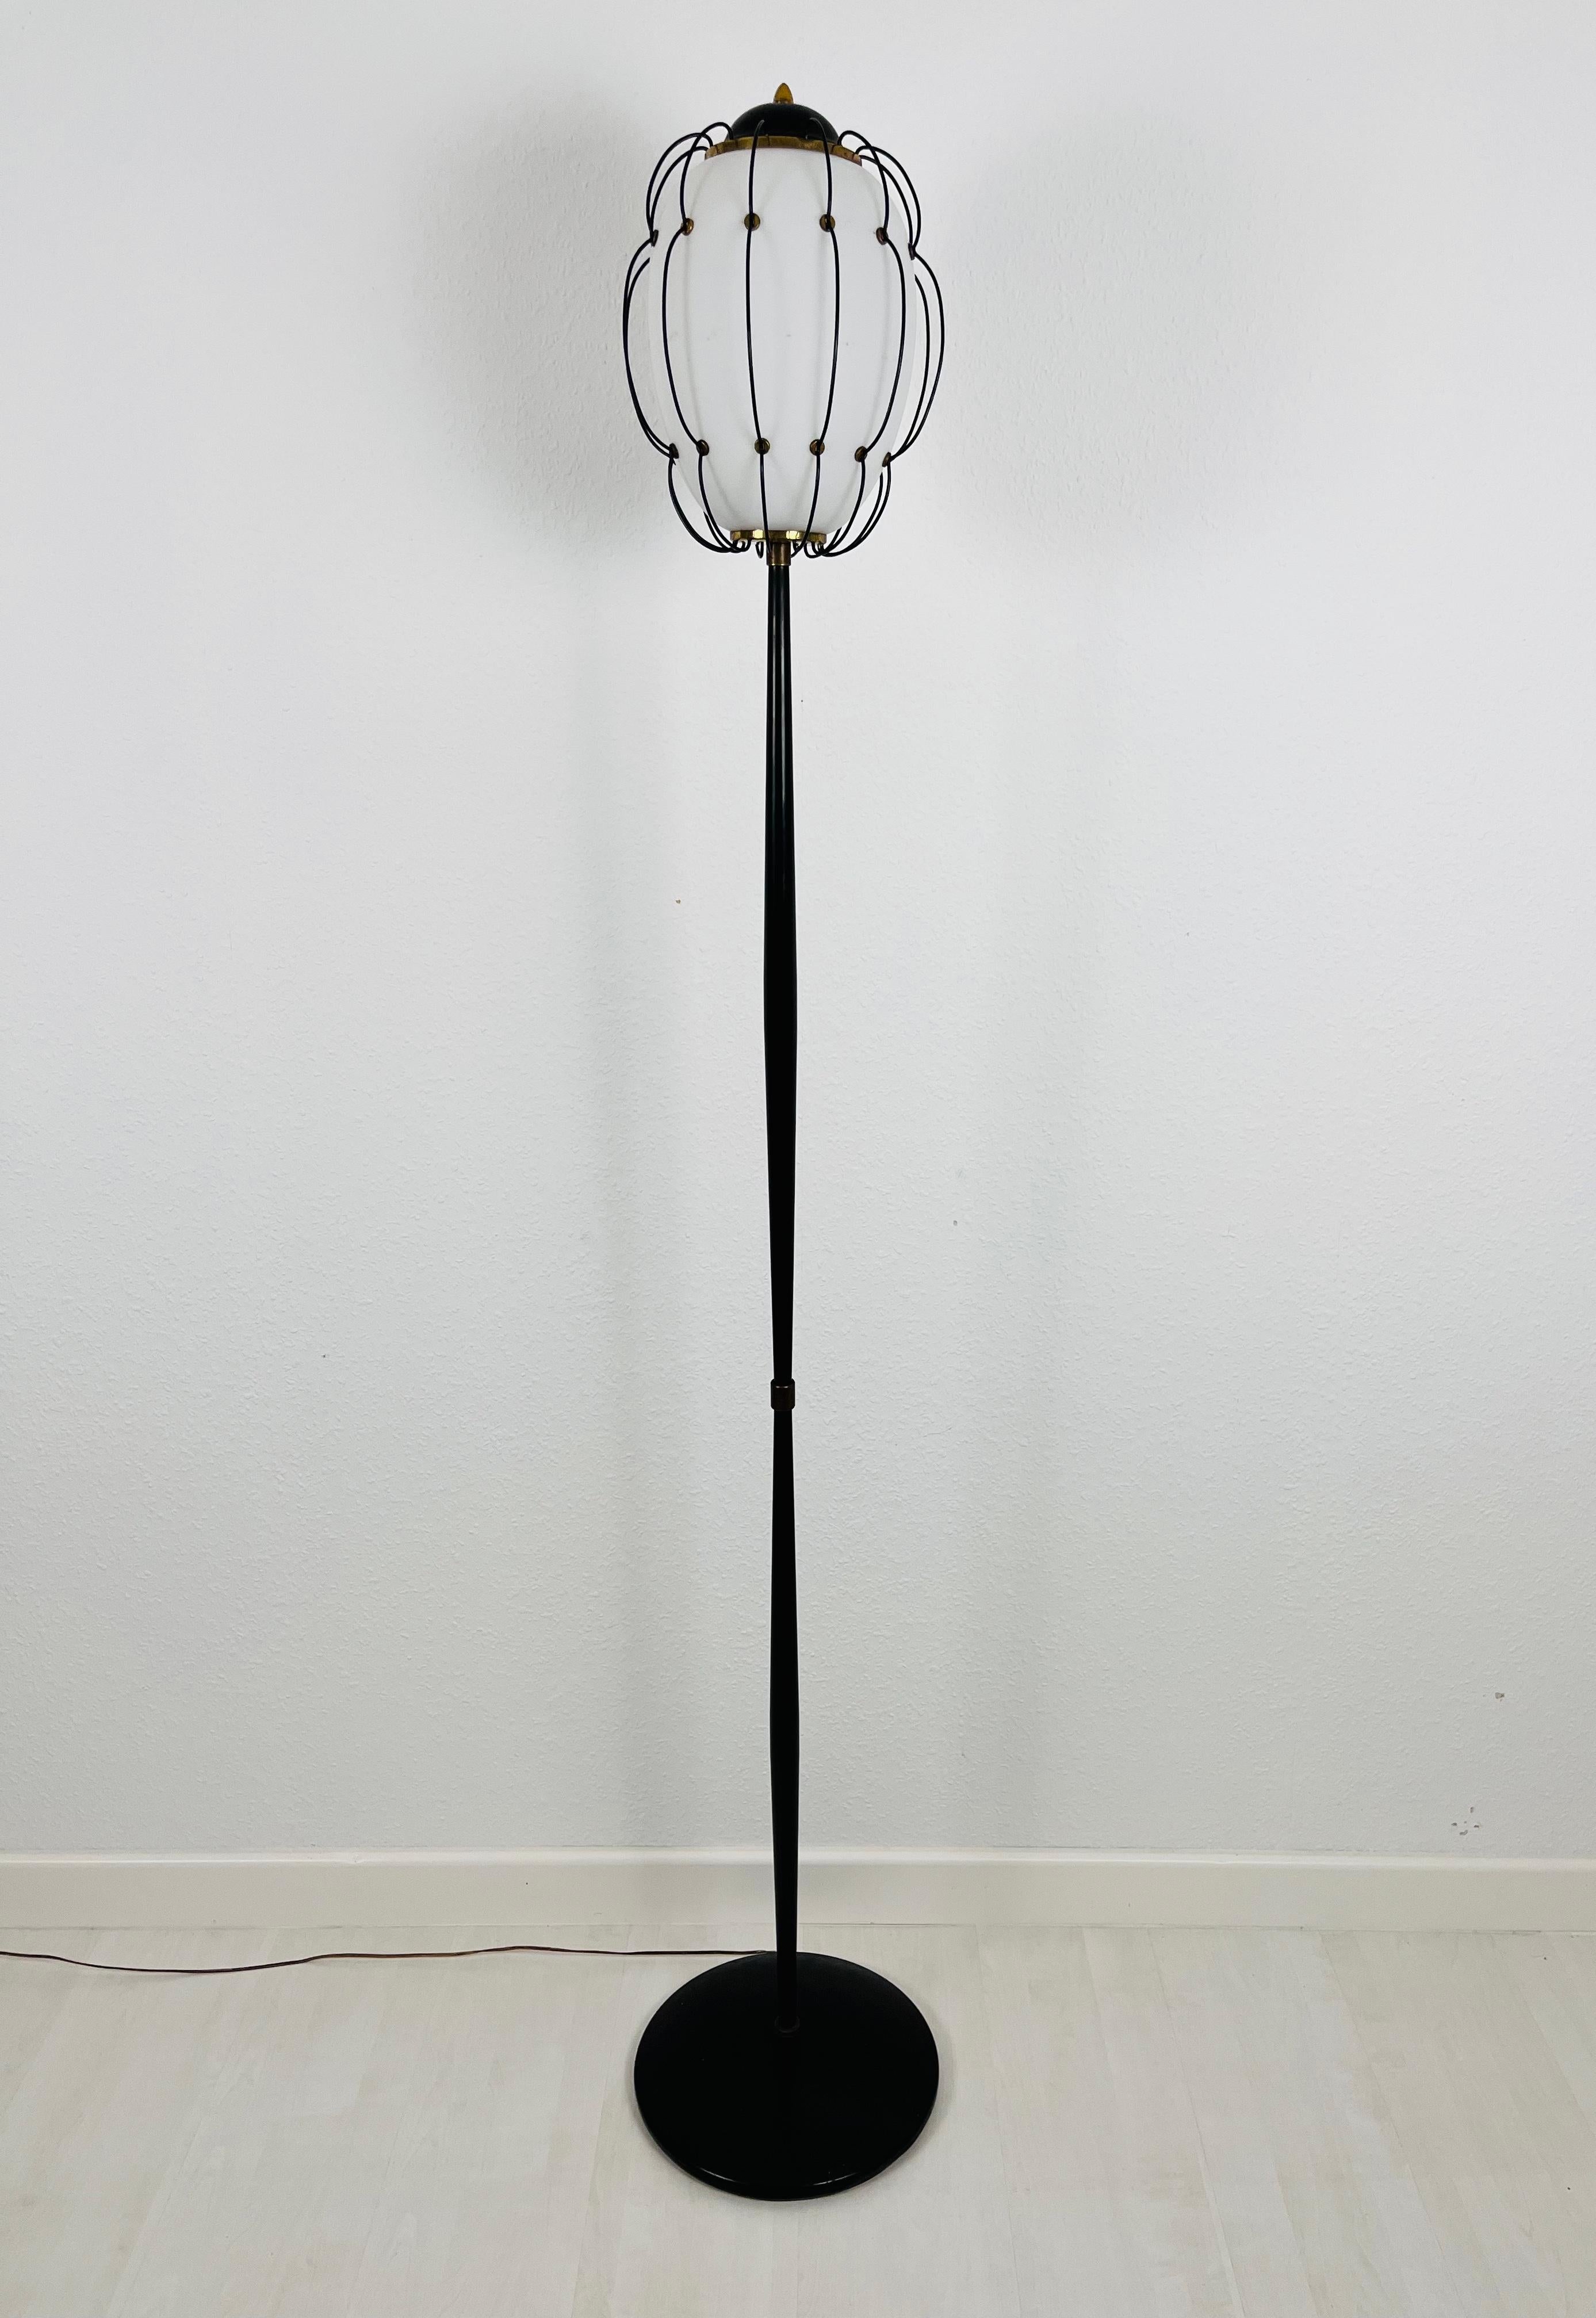 Iconic floor lamp designed by Angelo Lelli for Arredoluce in the 1950s. Round metal base with an elegant minimalist rod. Beautiful opaline glass surrouned by metal and brass ornaments.

The light requires one E27 (US E26) light bulb. Works both